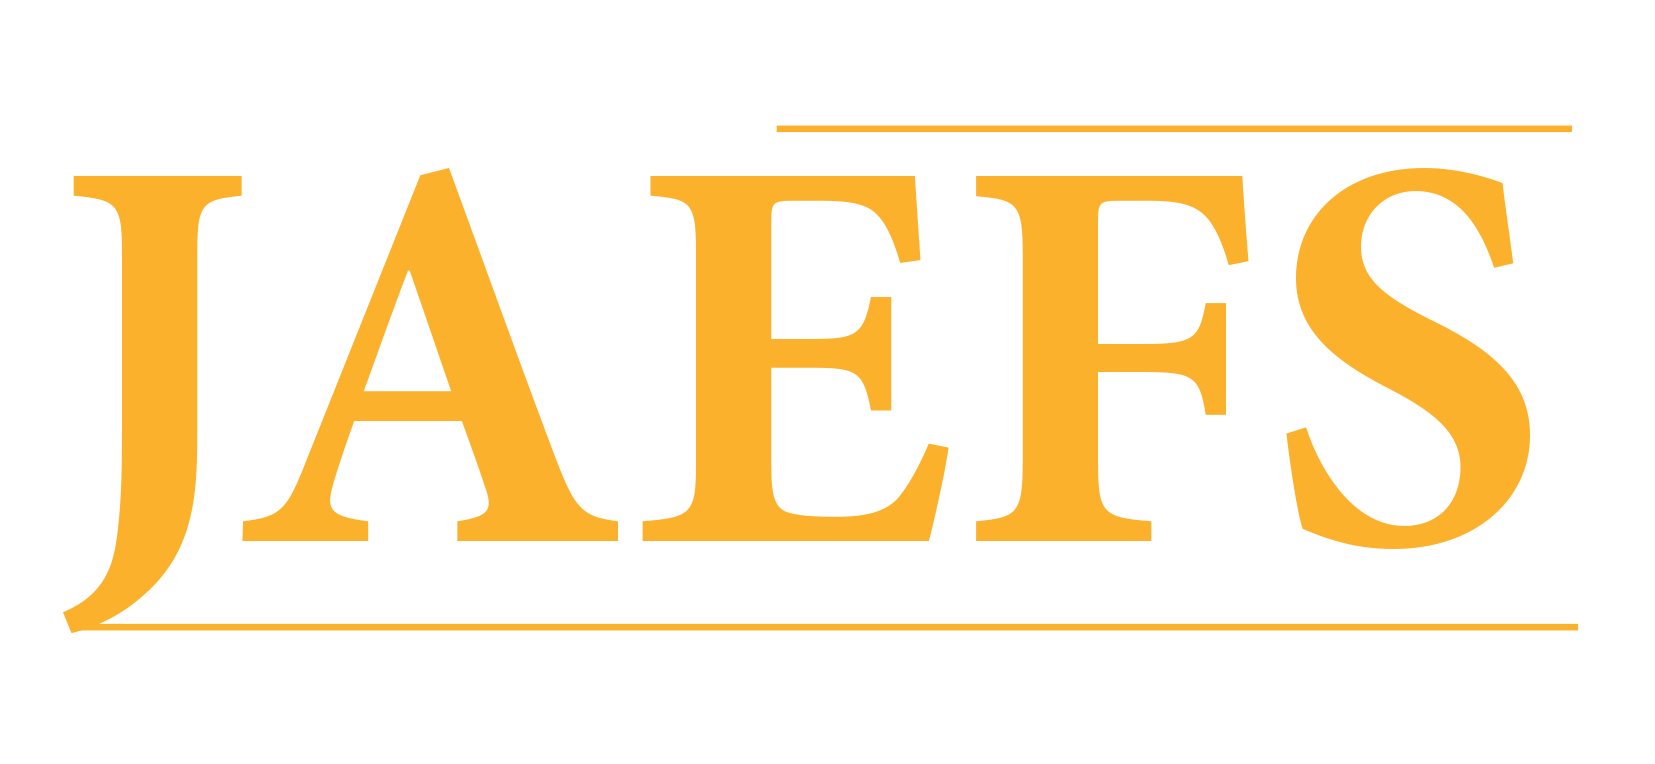 International Journal of Agriculture, Environment and Food Sciences